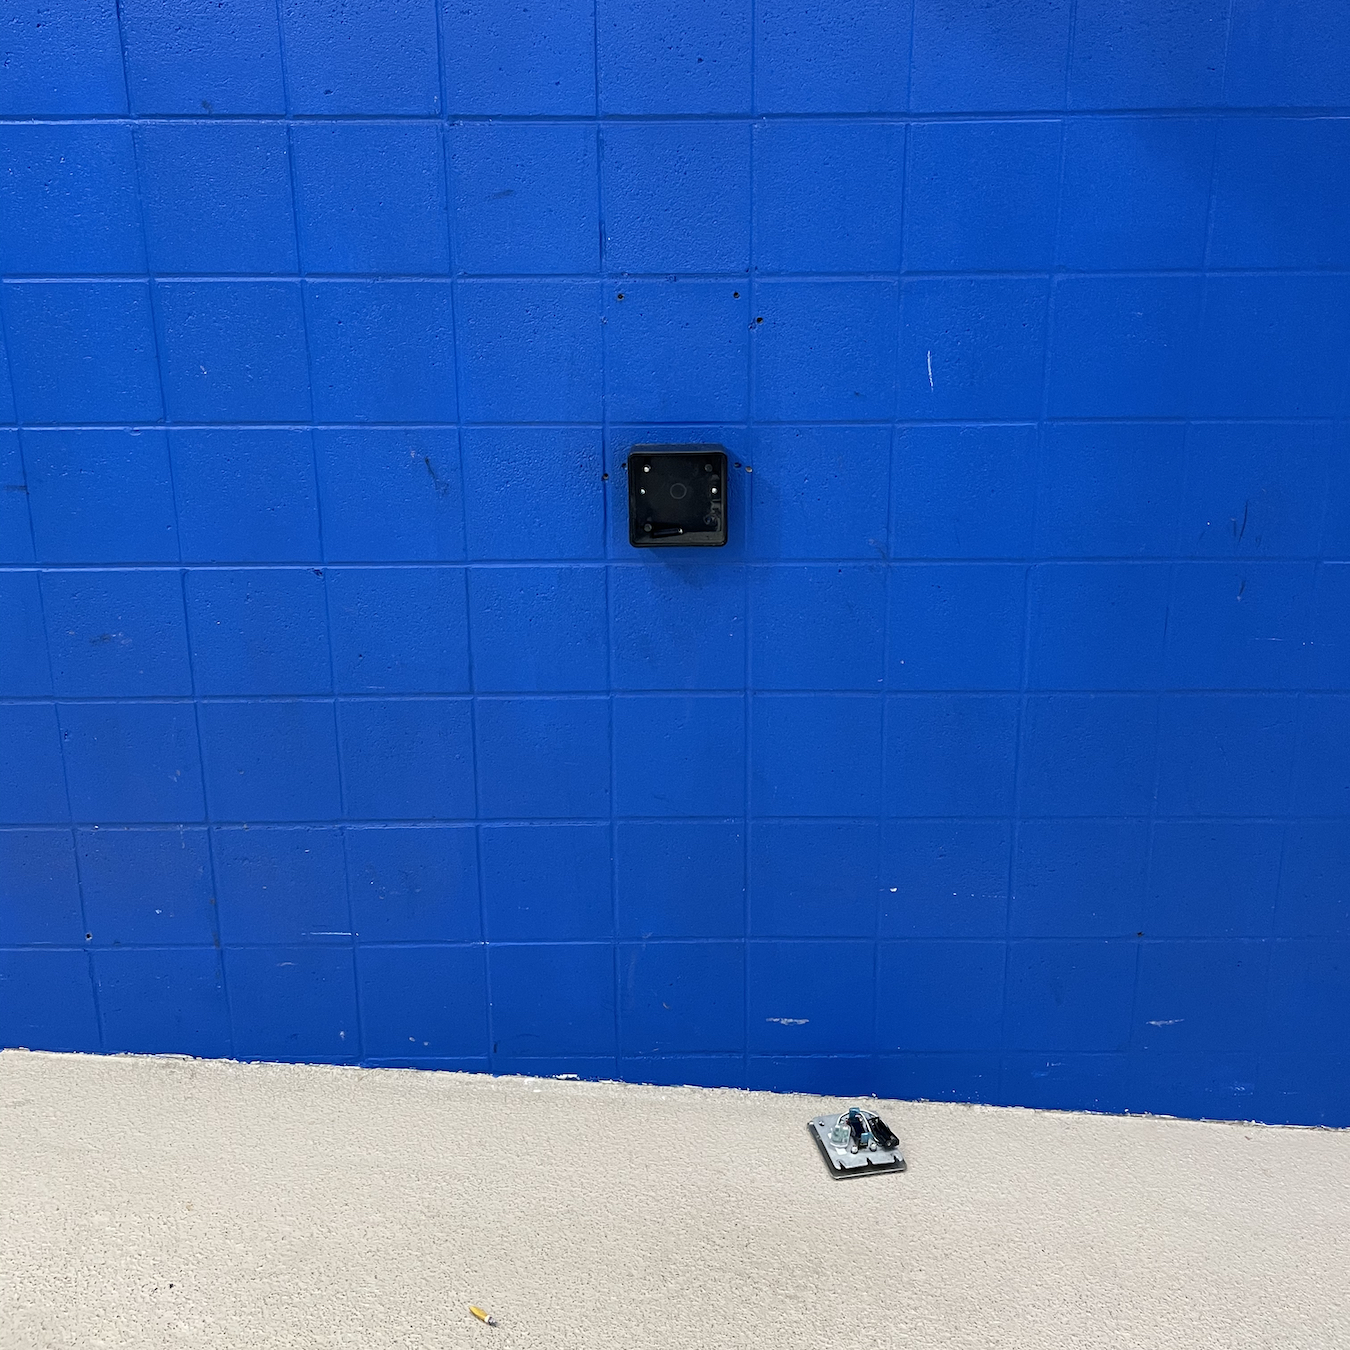 A photo of an accessibility button that would be used to open a door, however the button has fallen outside of the device and onto to the floor, rendering it useless.